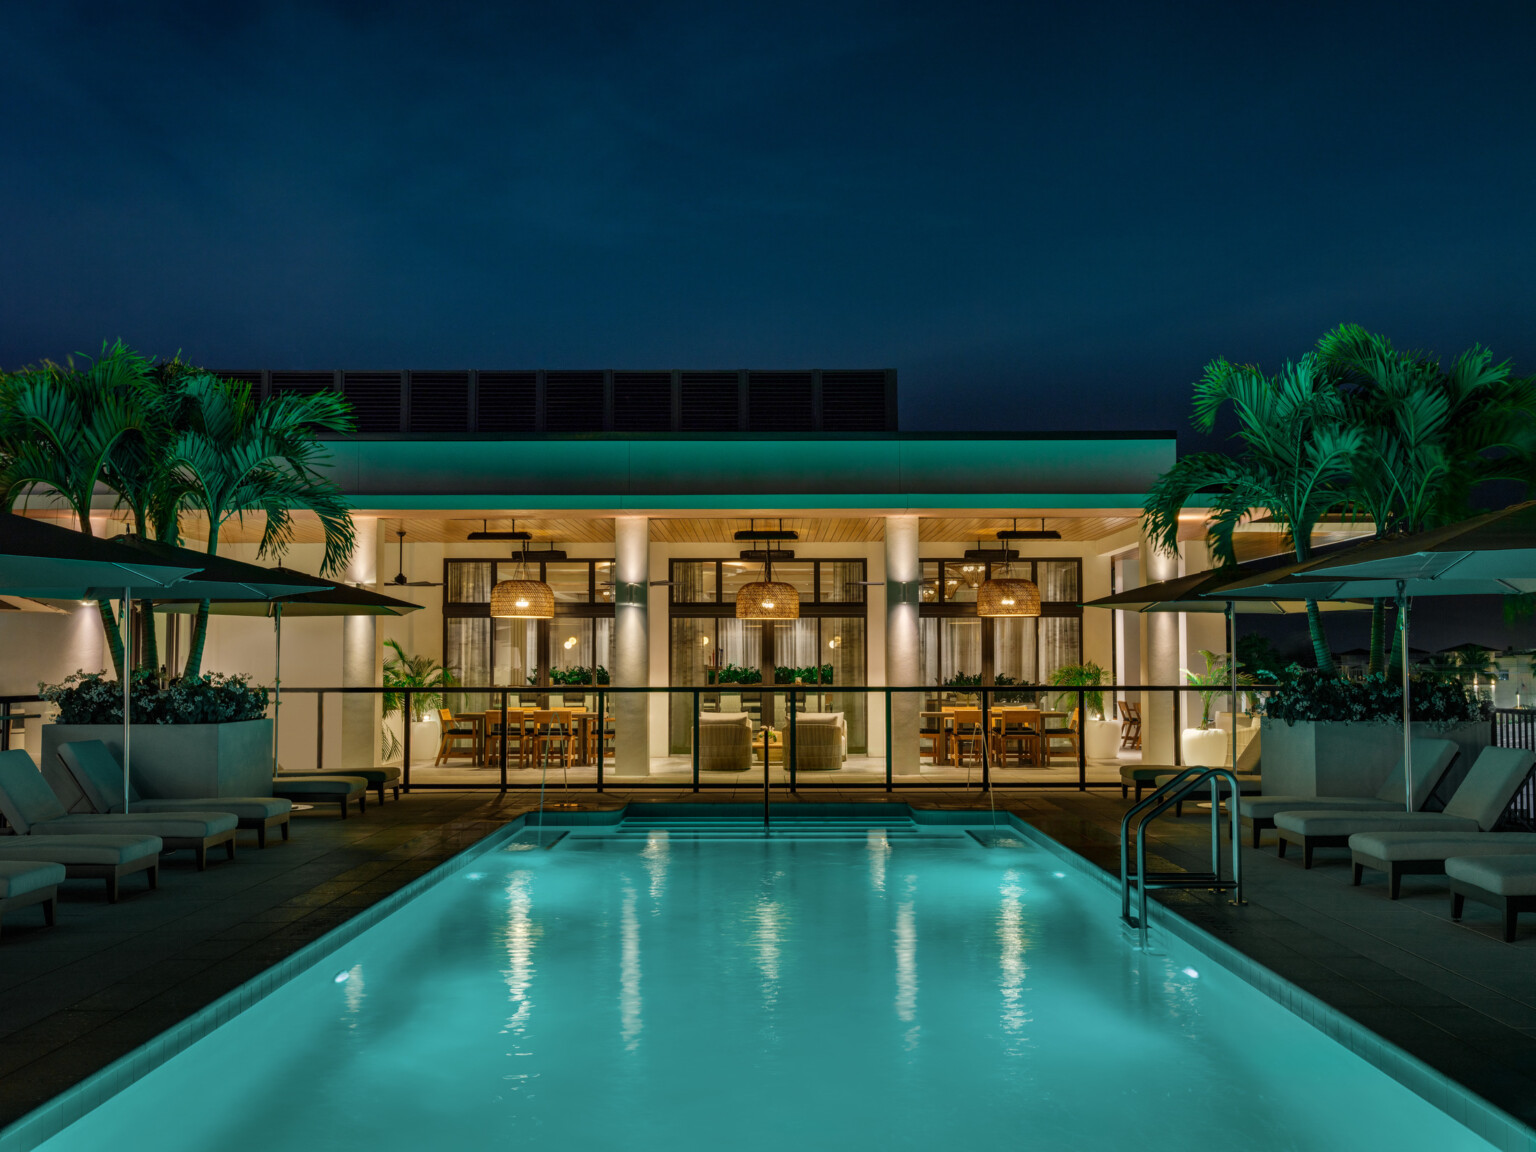 Nighttime rendering of a hotel pool showing turquoise waters in front of an outdoor patio with round light fixtures handing from the ceiling